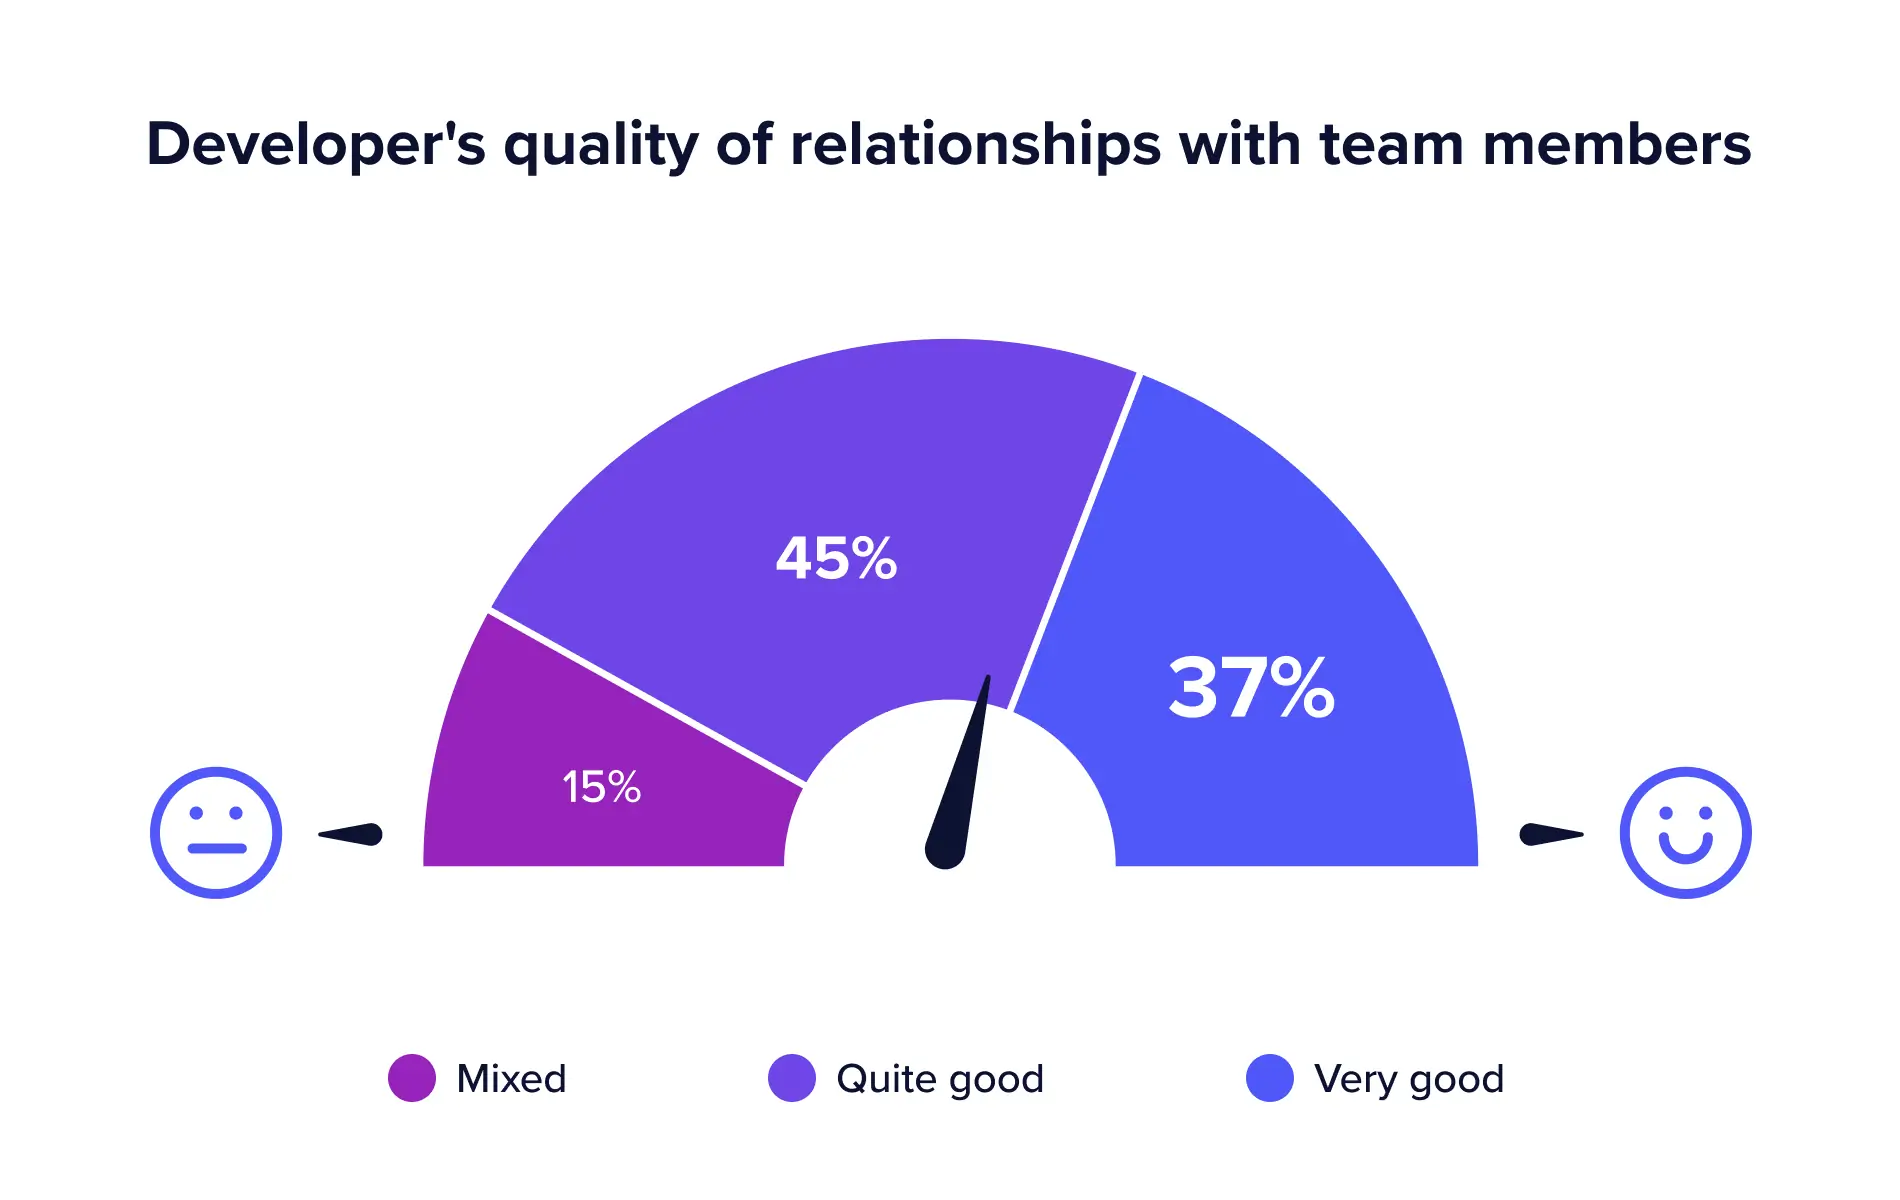 More than 80 percent of developers have a "quite good" or "very good" relationship with their team